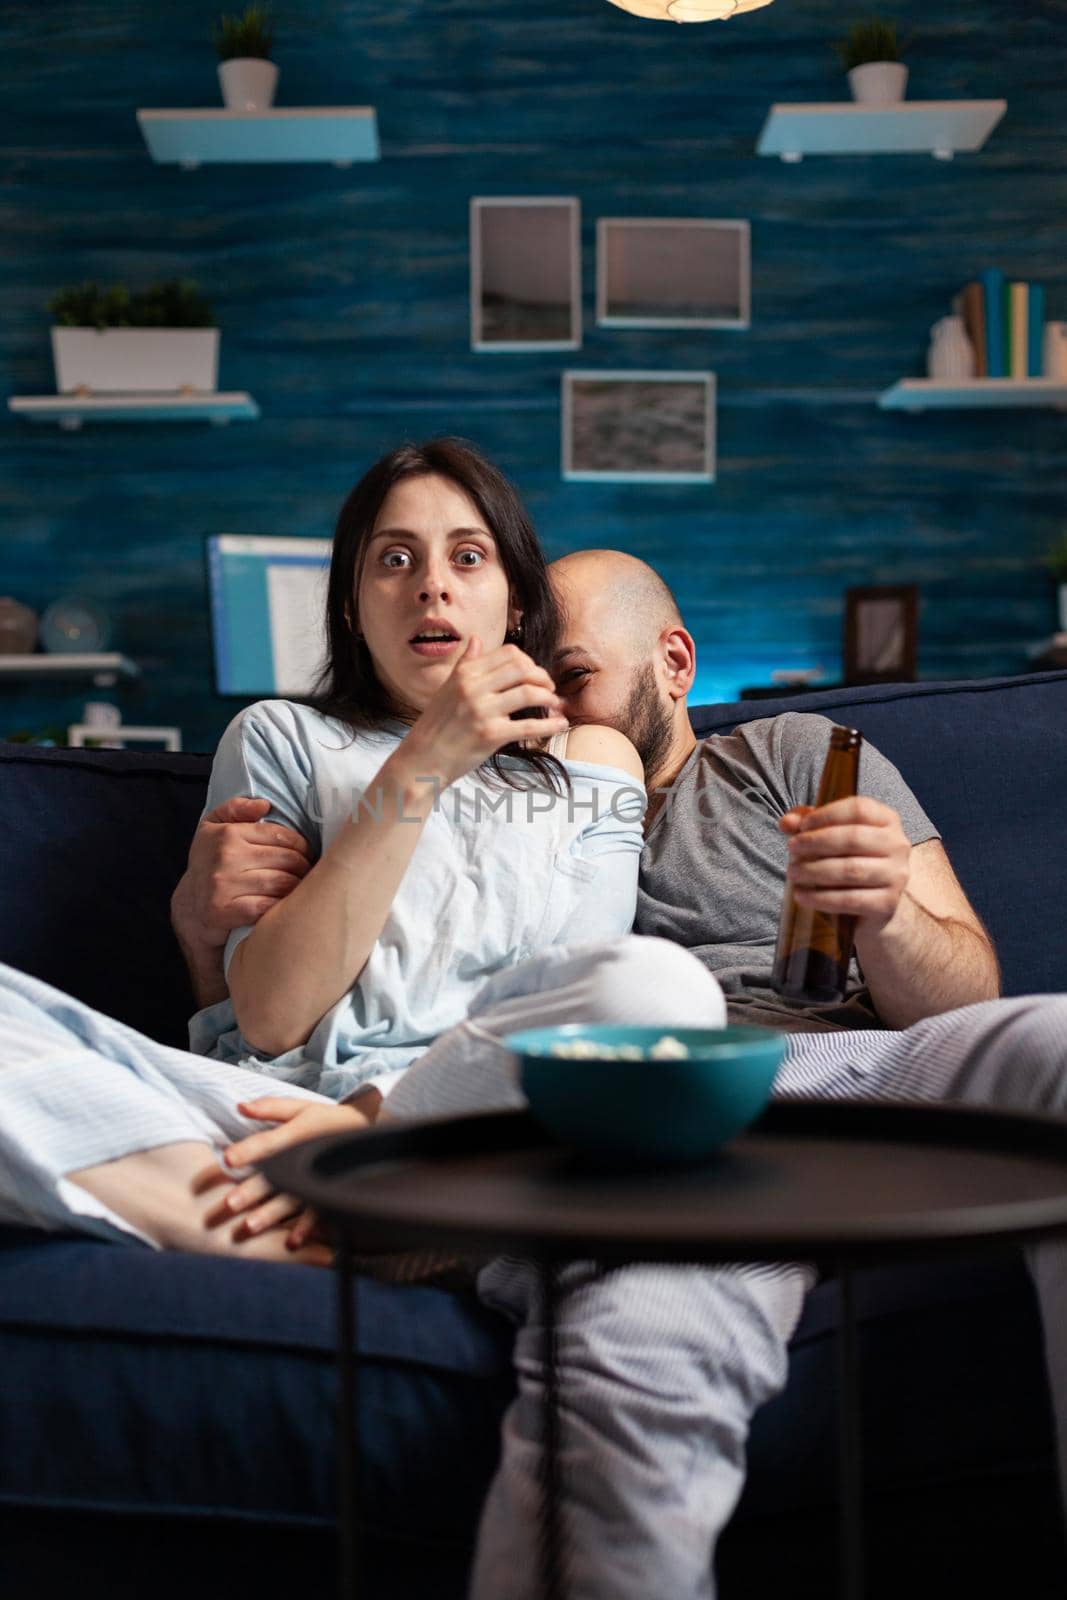 Confused shocked couple watching TV movie at night and eating popcorn, drinking beer having fear facial expression. Focused astonished people sitting on confortable couch chilling together